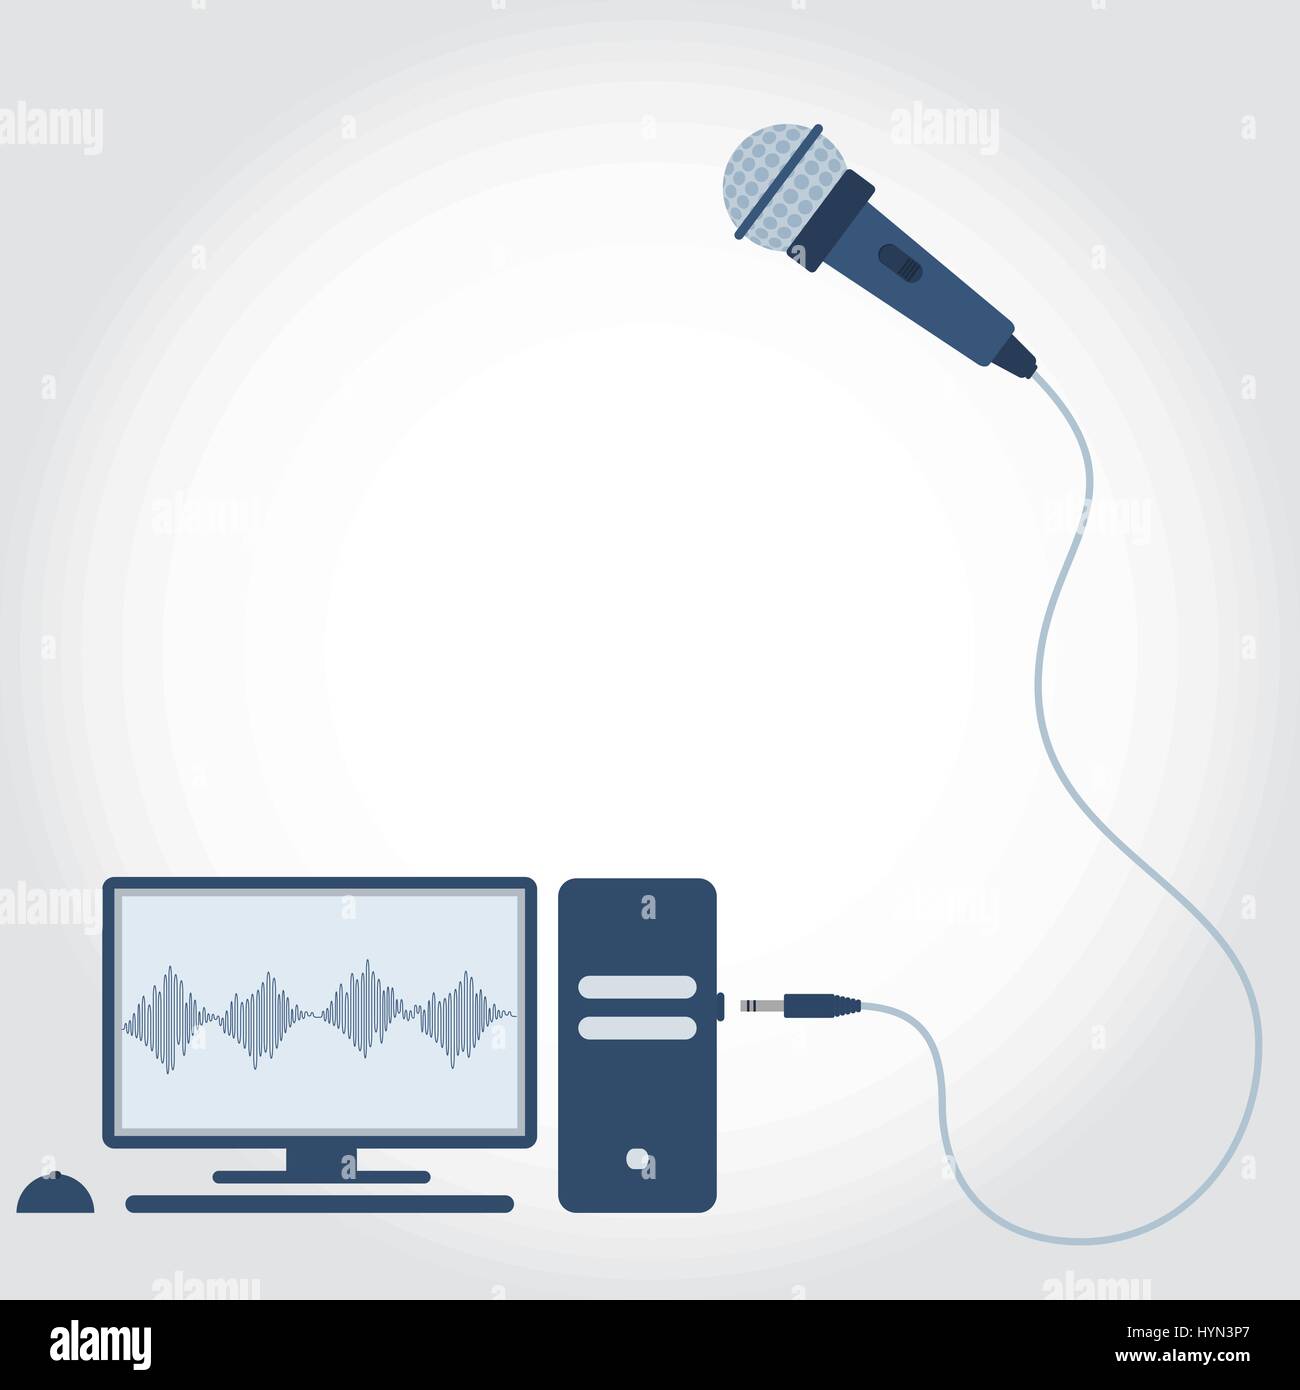 PC with microphone unplugged. Sound wave symbol showing on monitor. Empty space for insert text. Flat design. Stock Vector